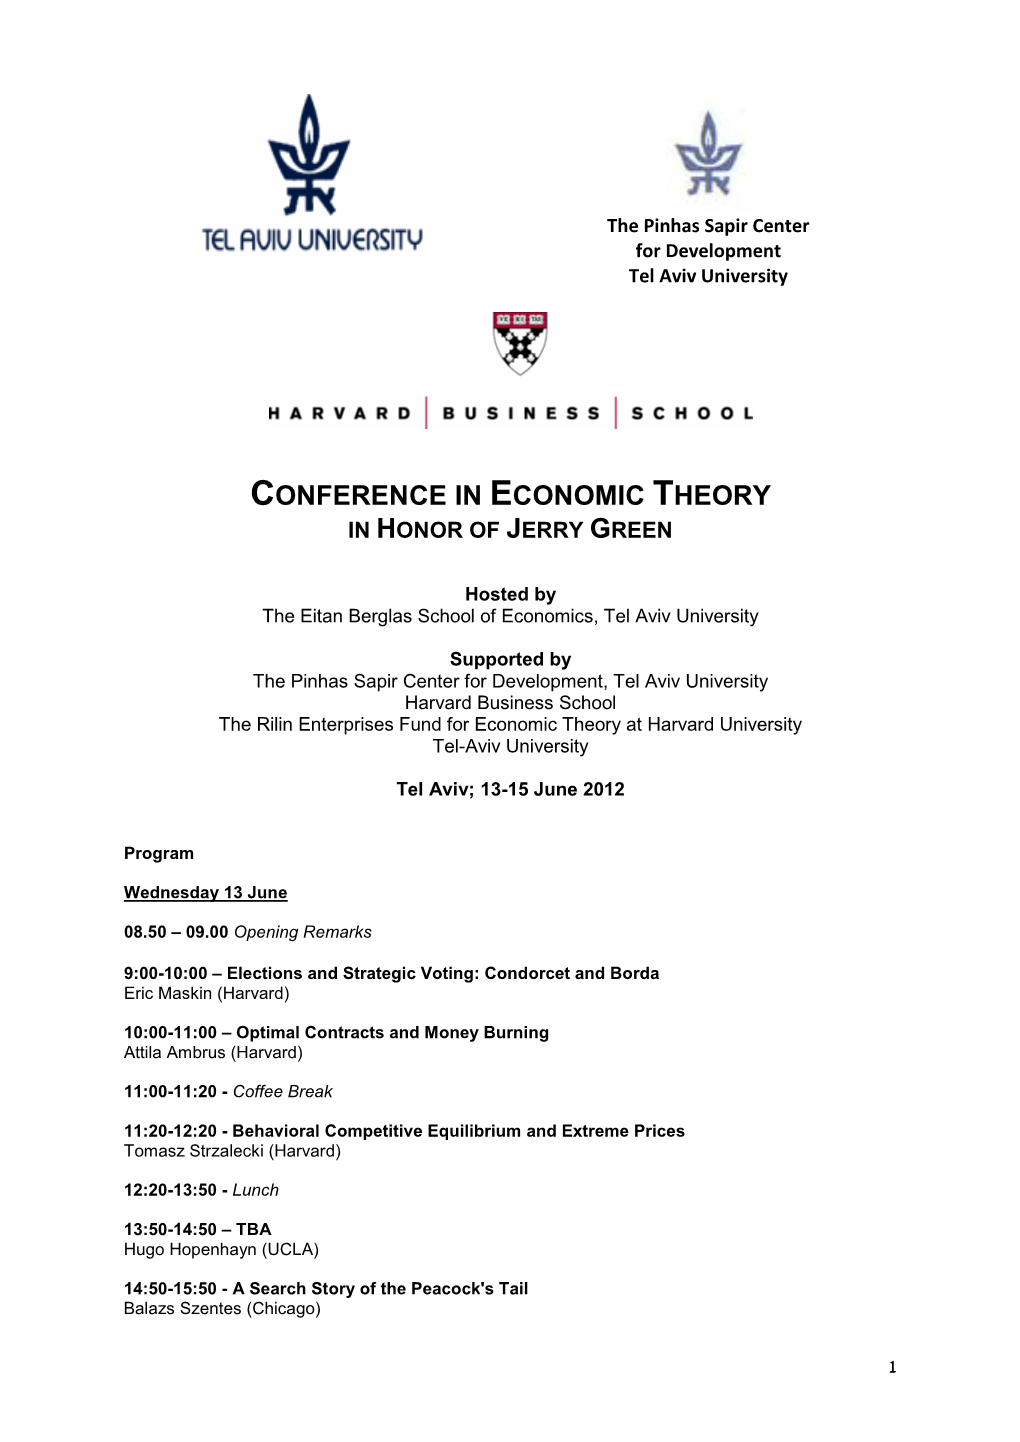 Conference in Economic Theory in Honor of Jerry Green